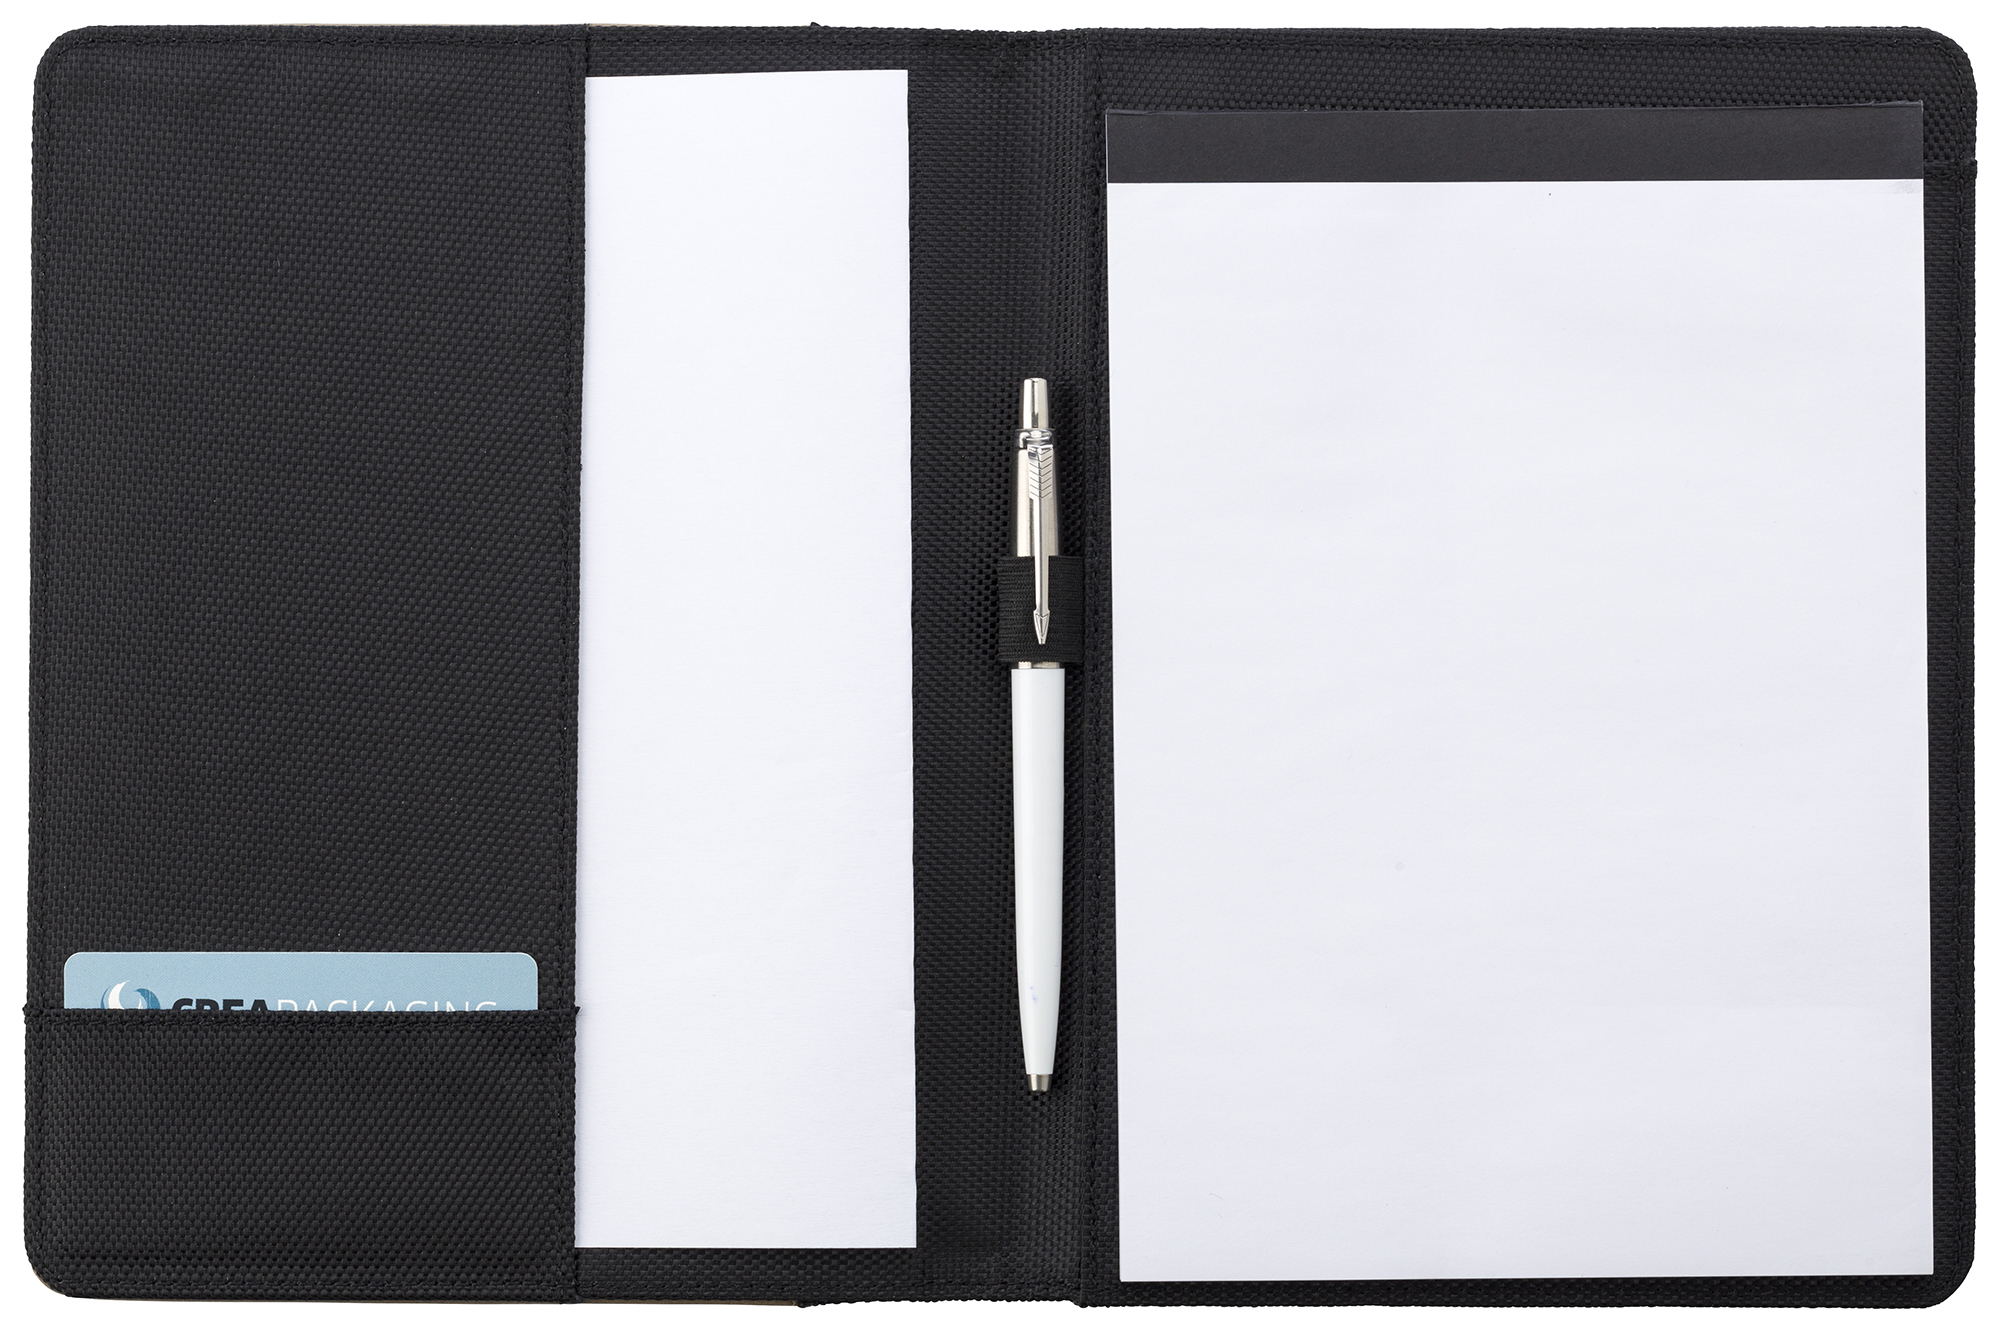 Branded A5 Pad folio with PU cover,  a large internal pocket, one smaller sewed on pocket, an elasticated pen loop, and a 50 page lines note pad. 